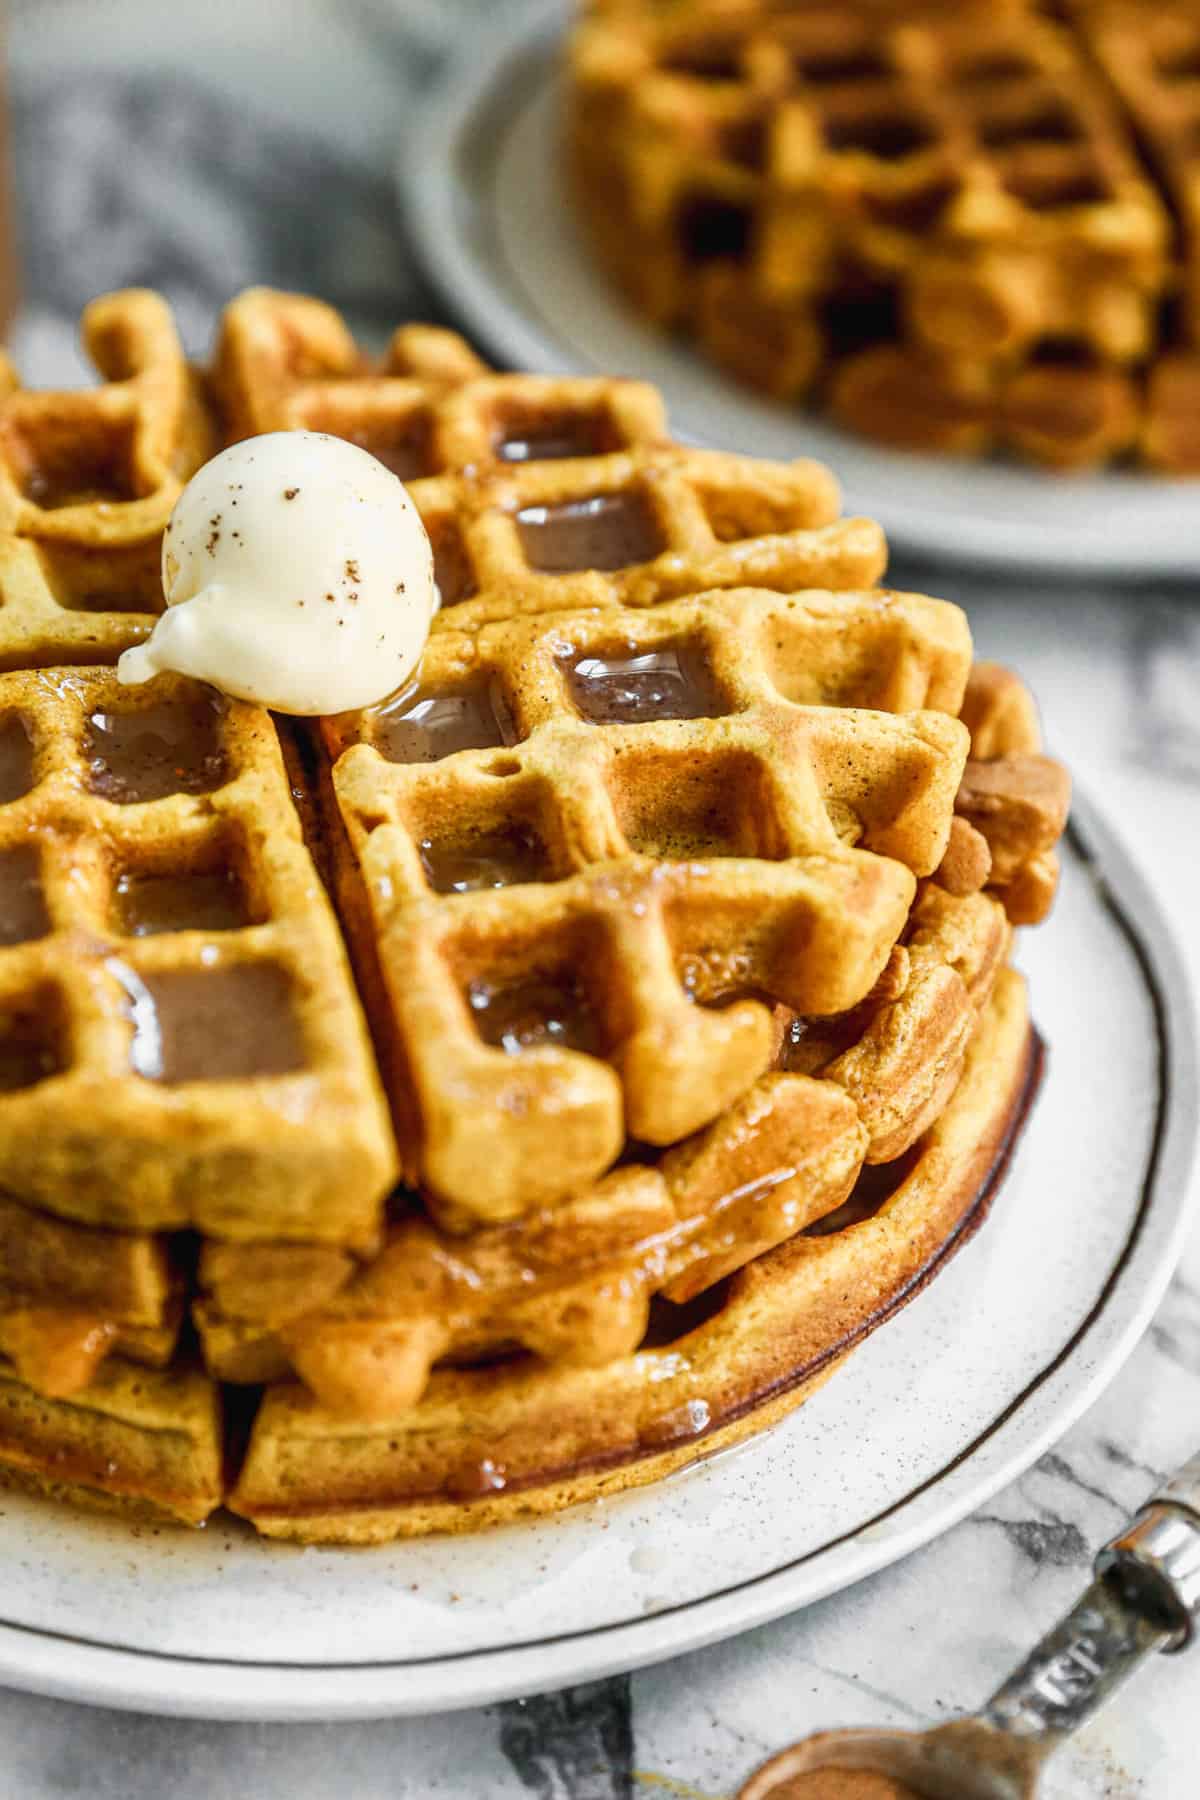 A close up image of three pumpkin spice waffles stacked on top of each other with a ball of butter and a drizzle of cinnamon syrup on top.